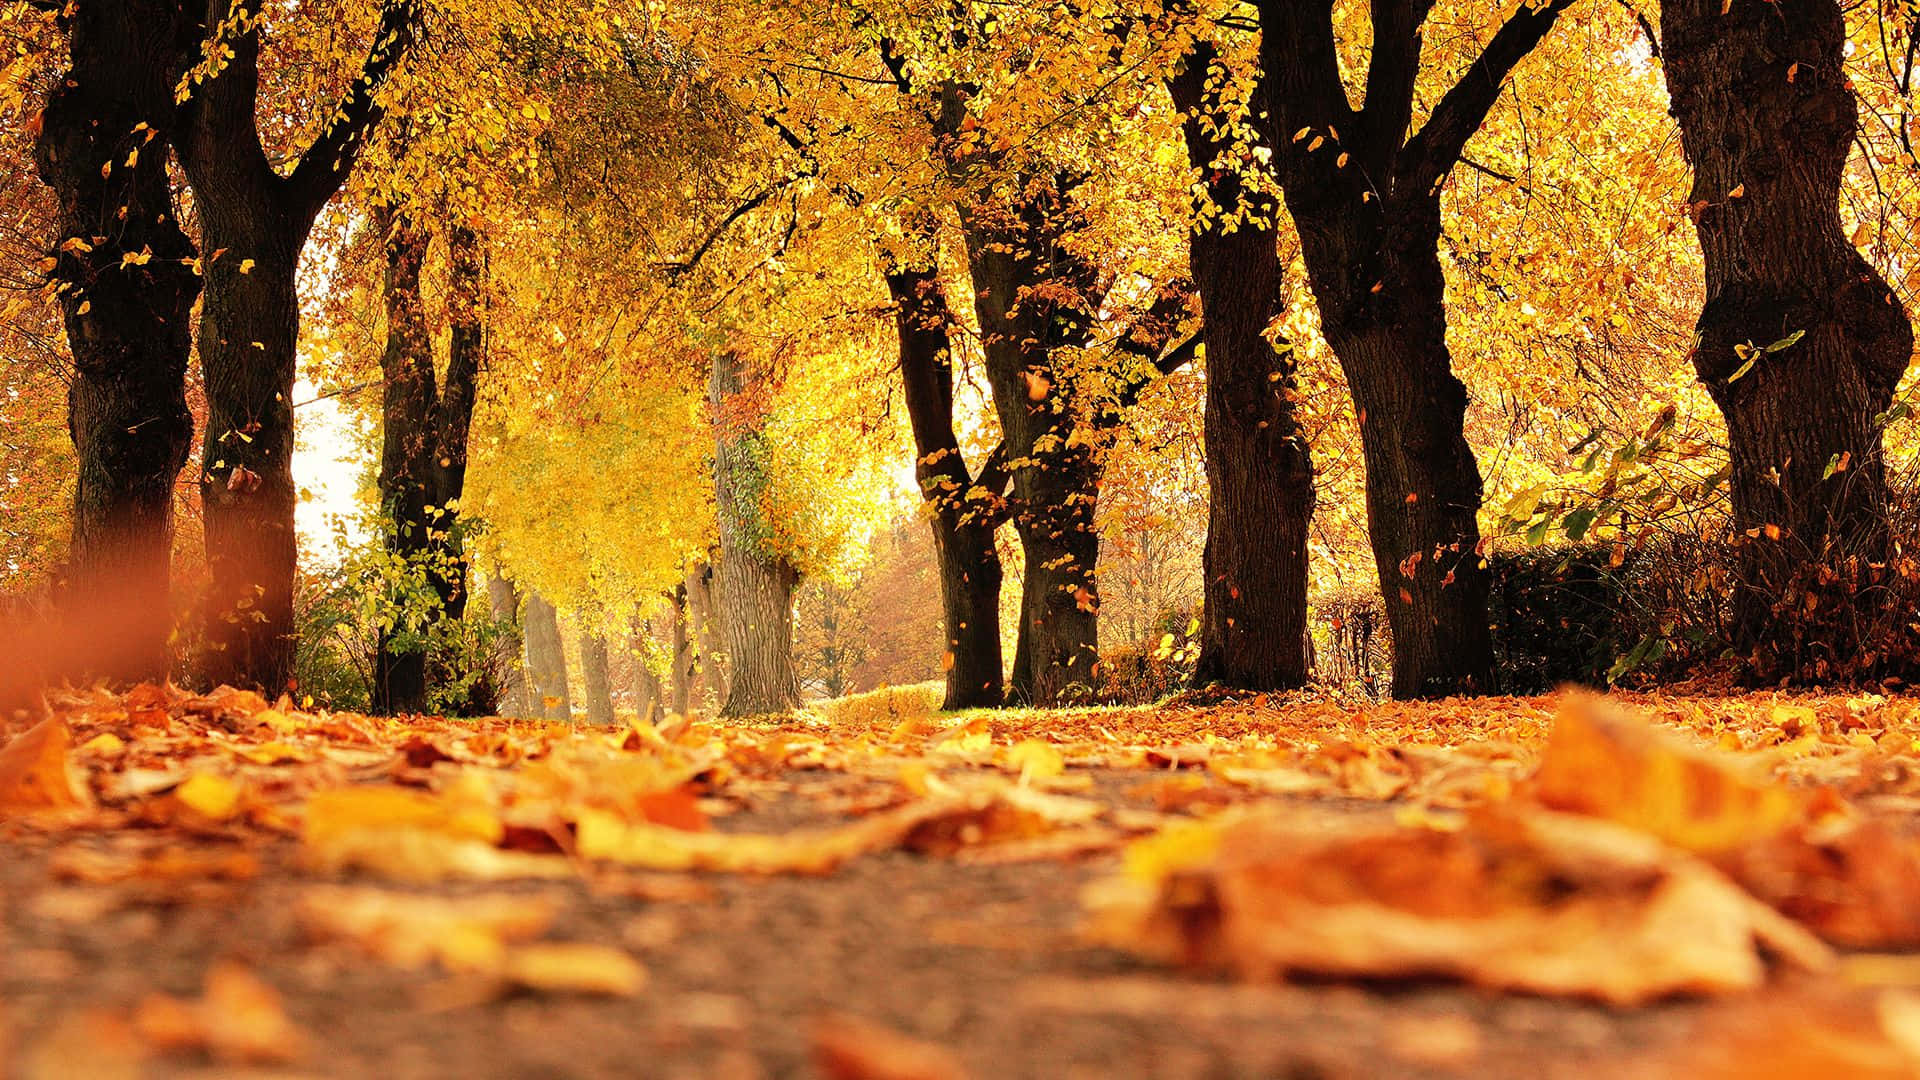 Enjoy a cup of coffee with a laptop in a chilly fall afternoon Wallpaper